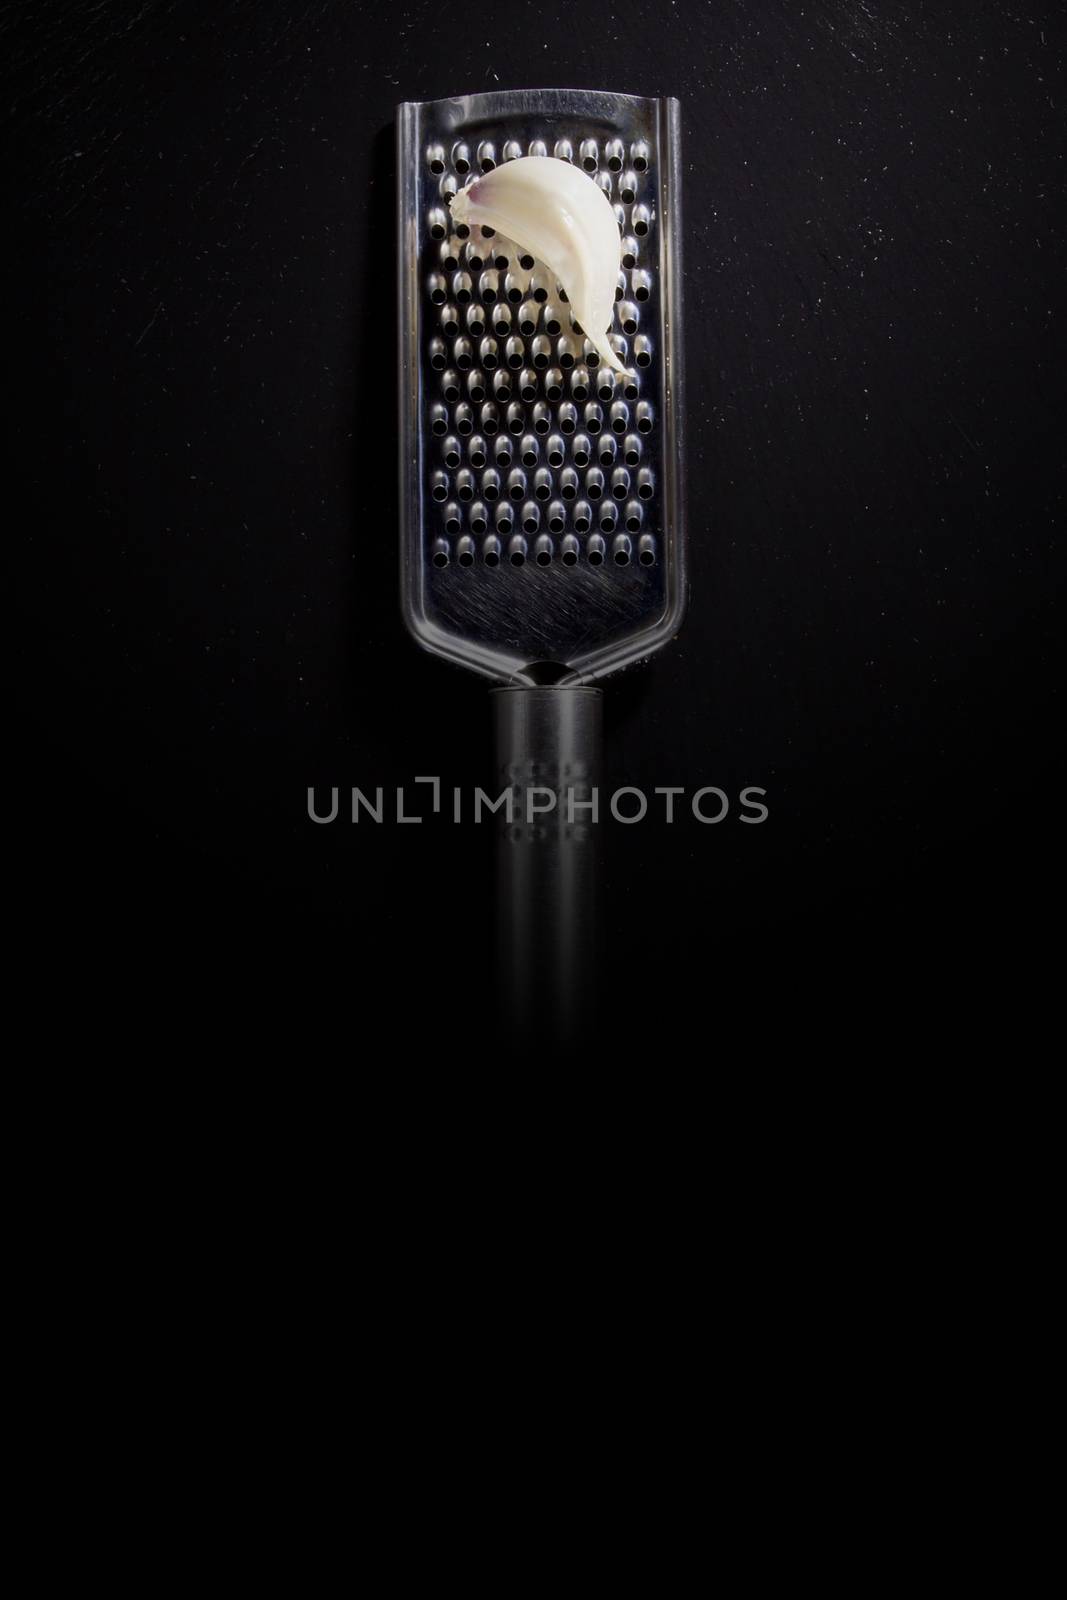 Metallic shiny grater and garlic on a black background